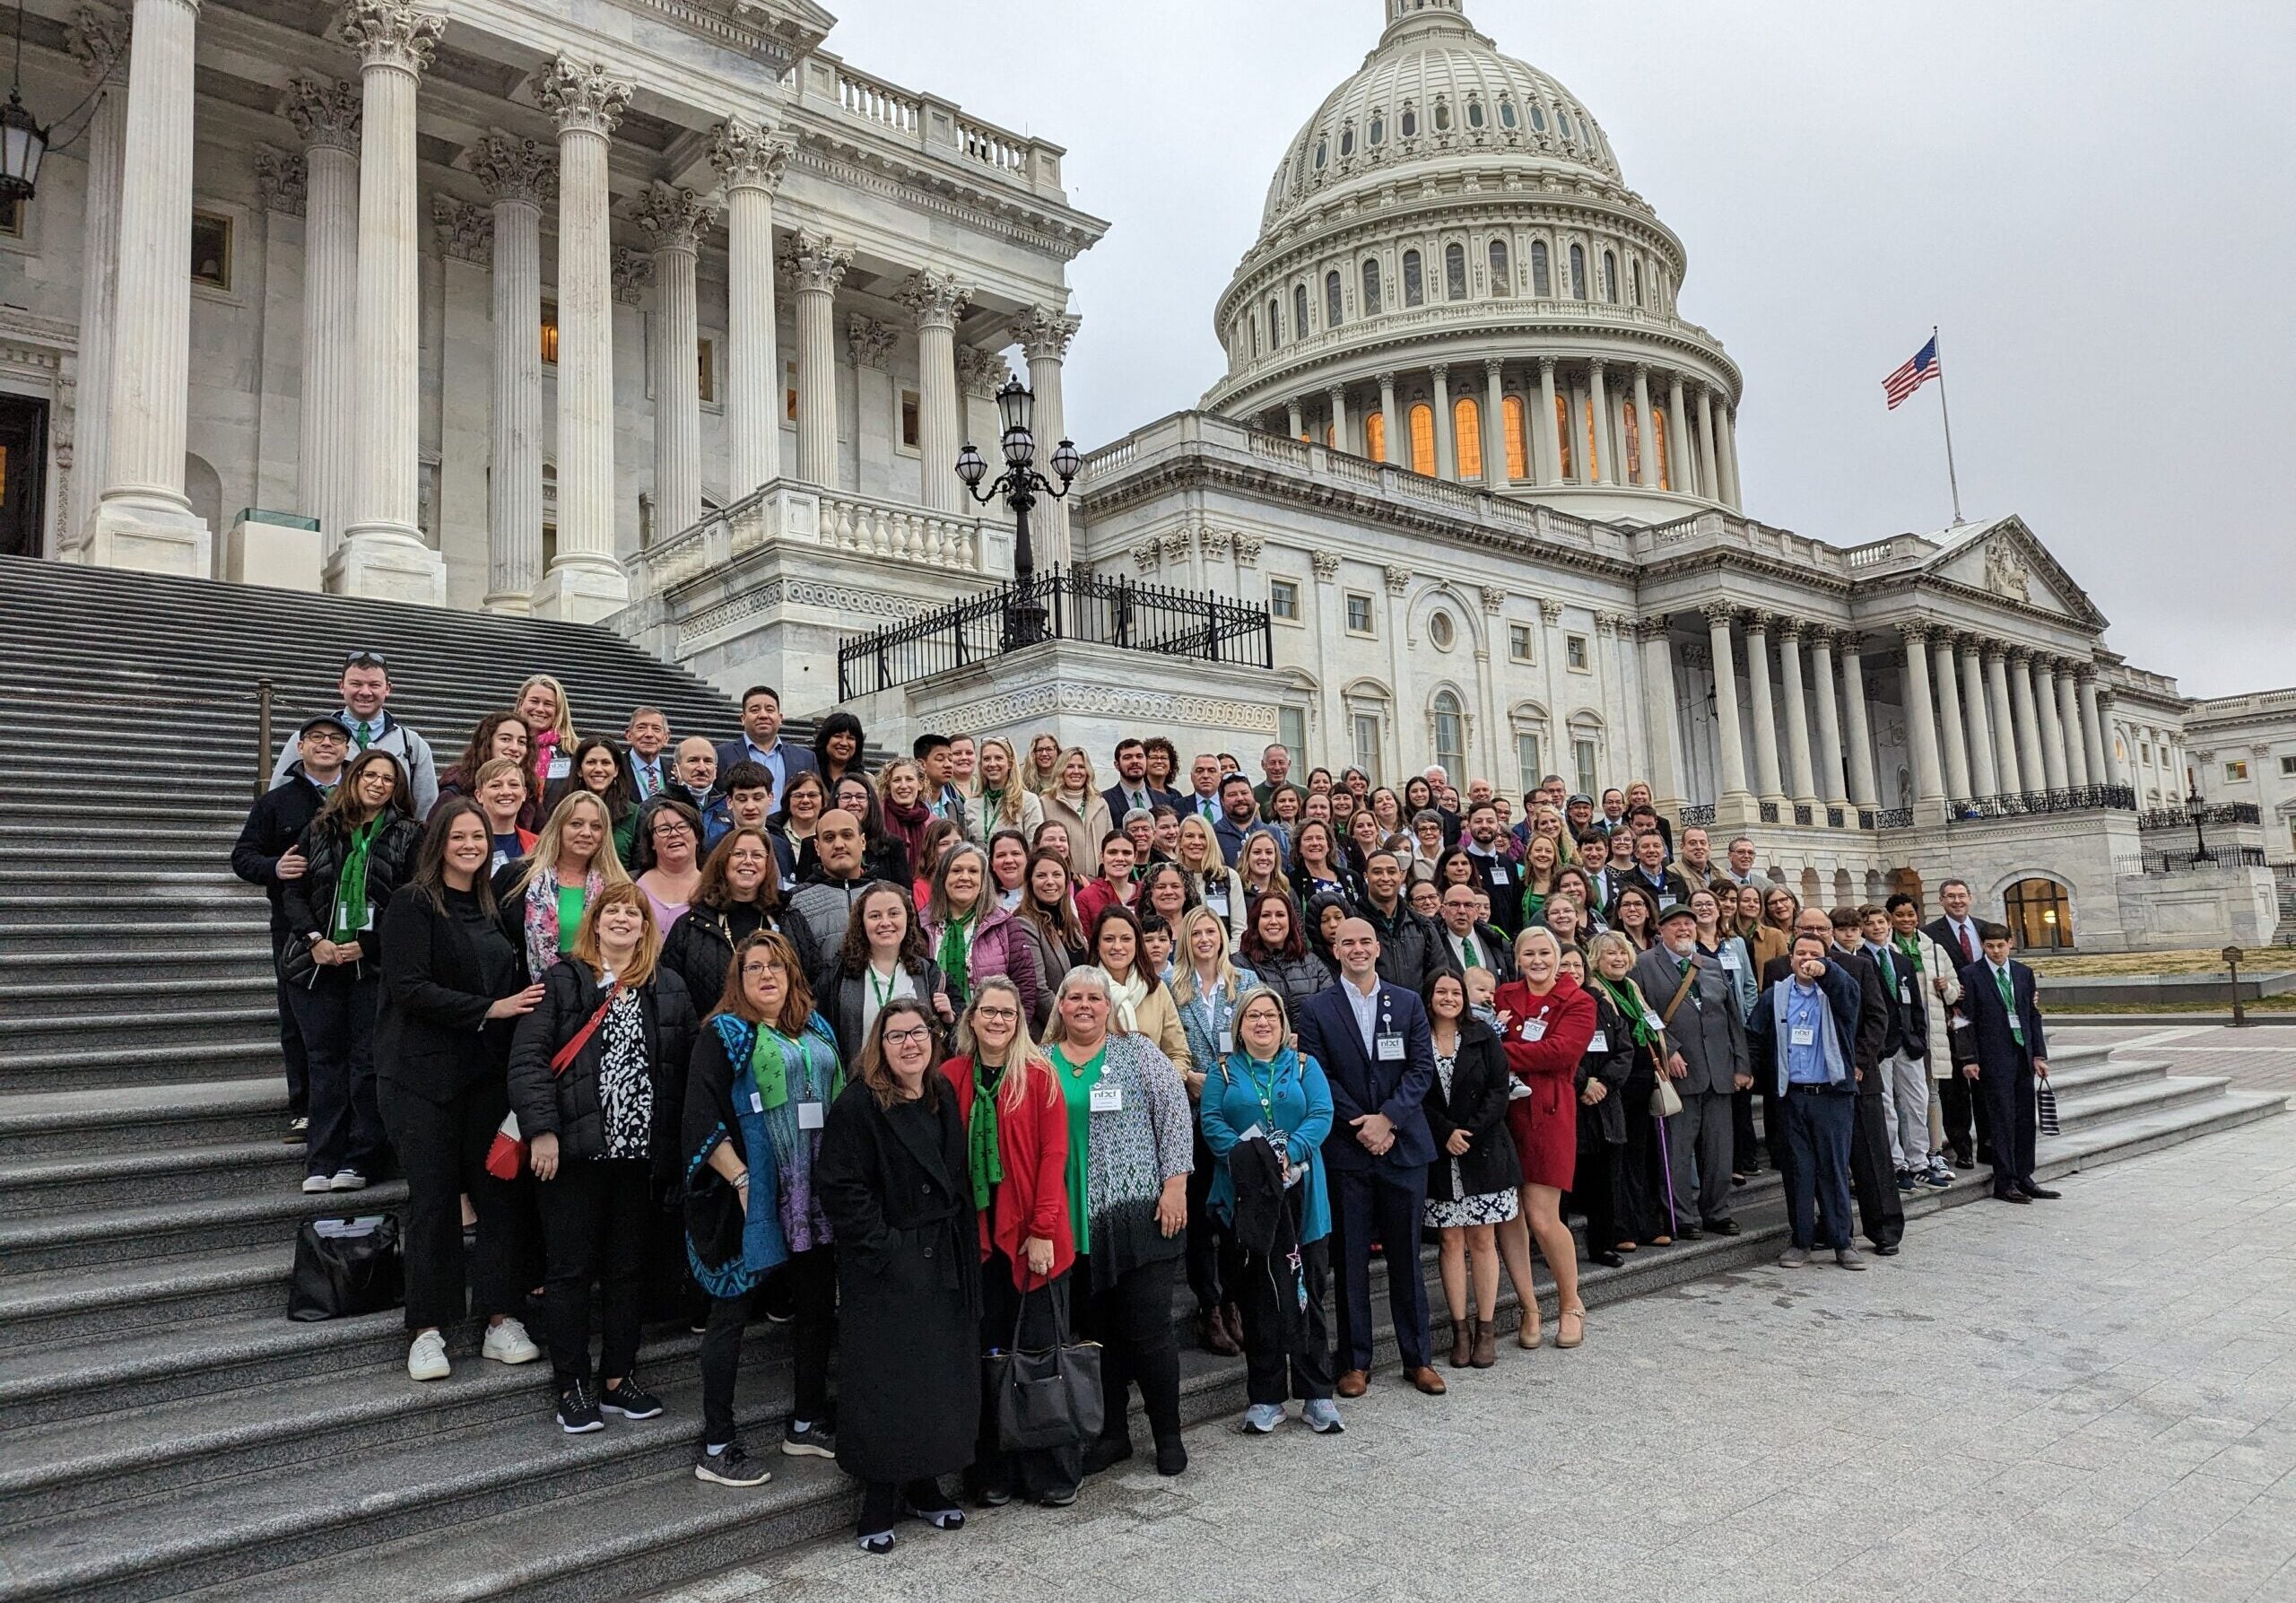 NFXF Advocates standing on the Capitol steps